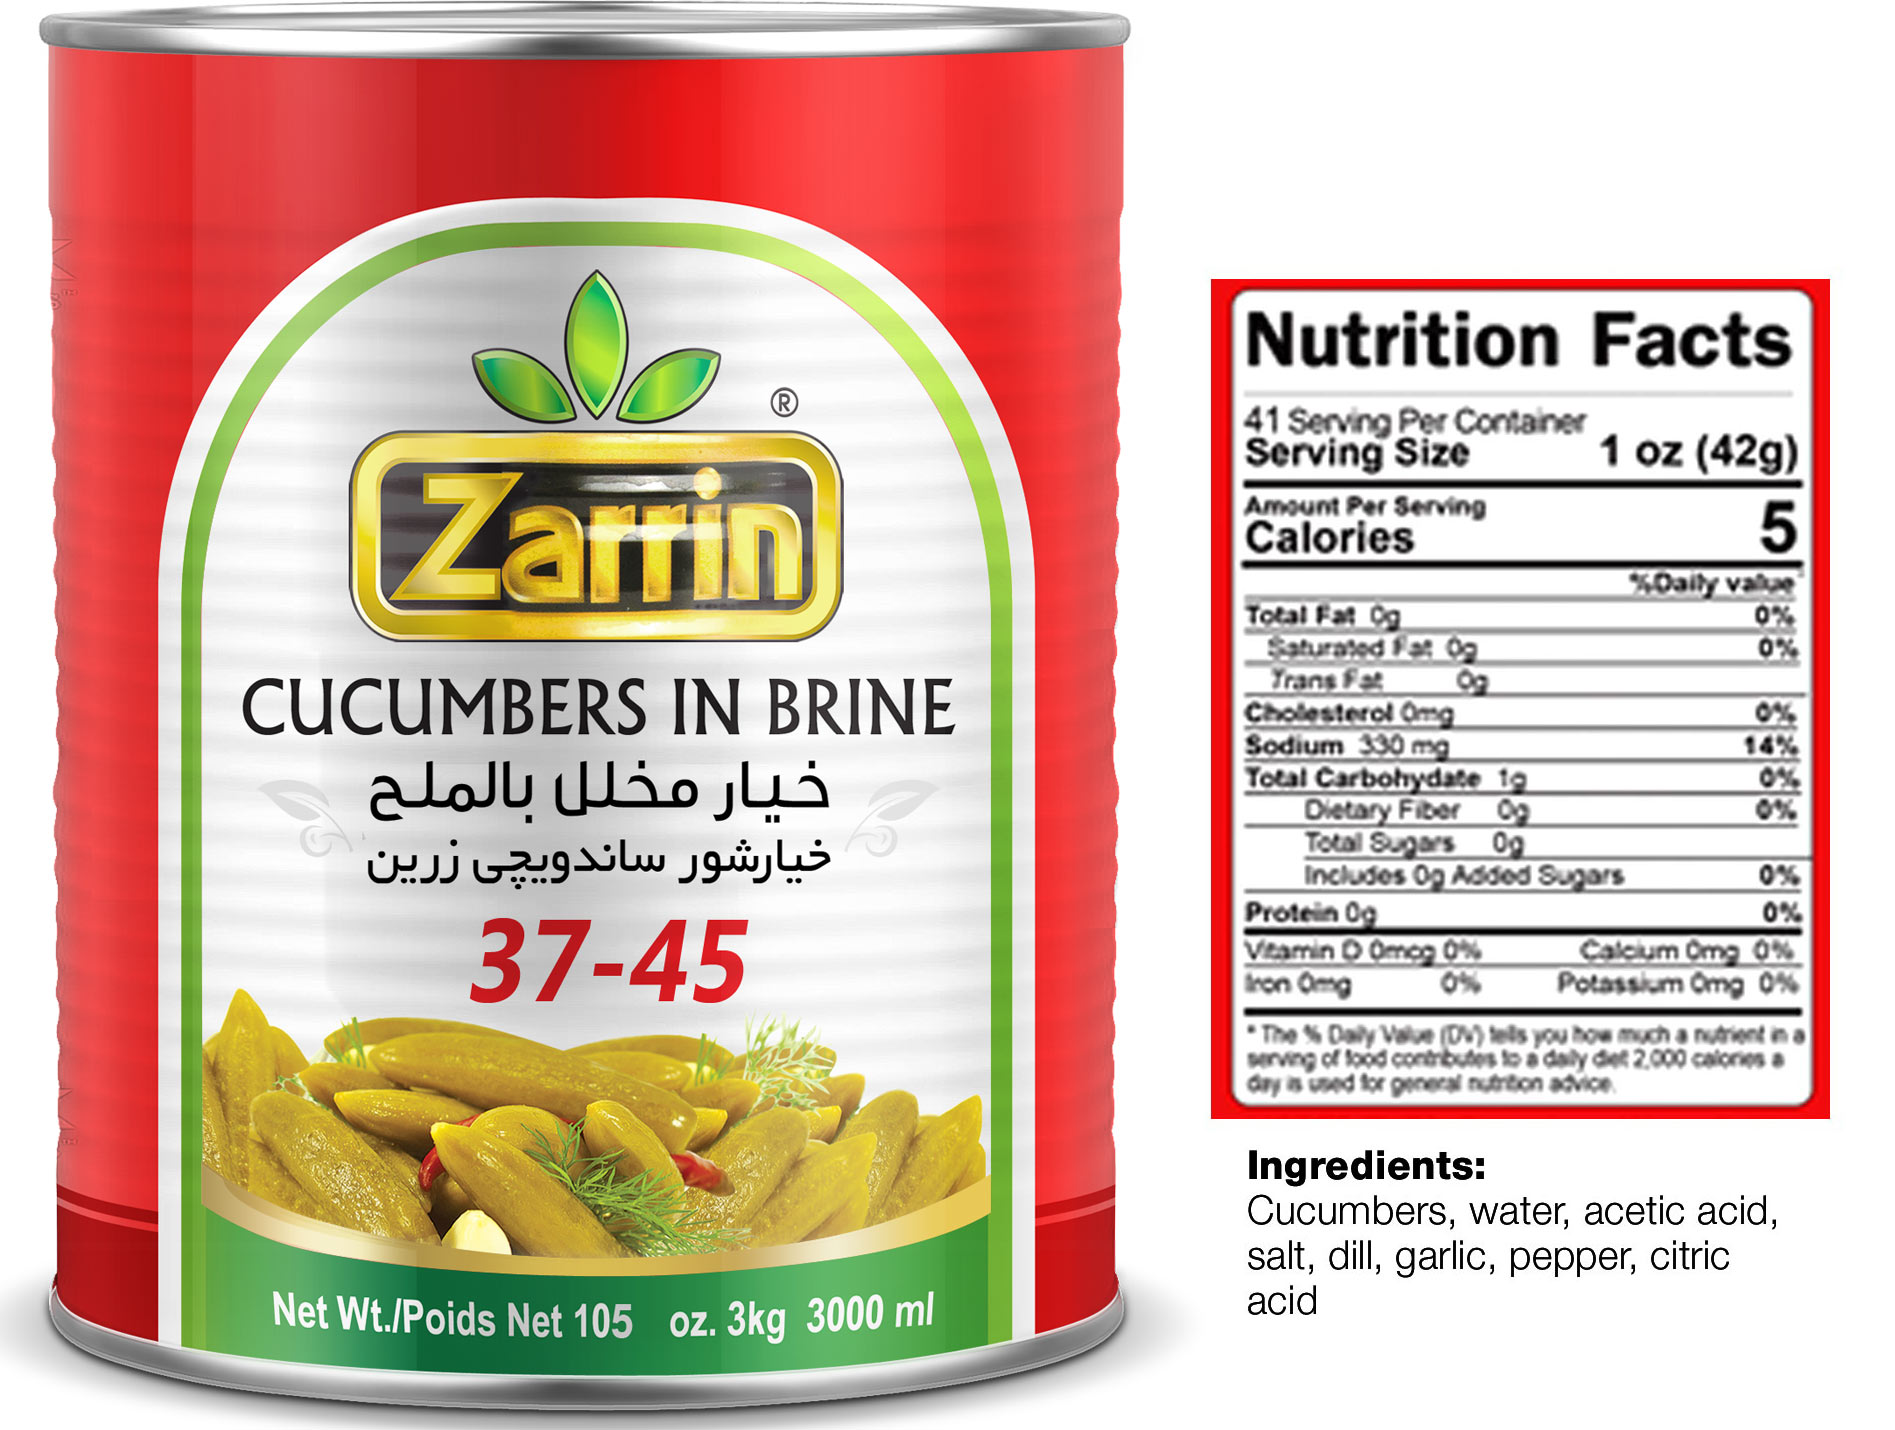 Pickled cucumbers in can 37-45 by Zarrin. Net weight 105 oz.